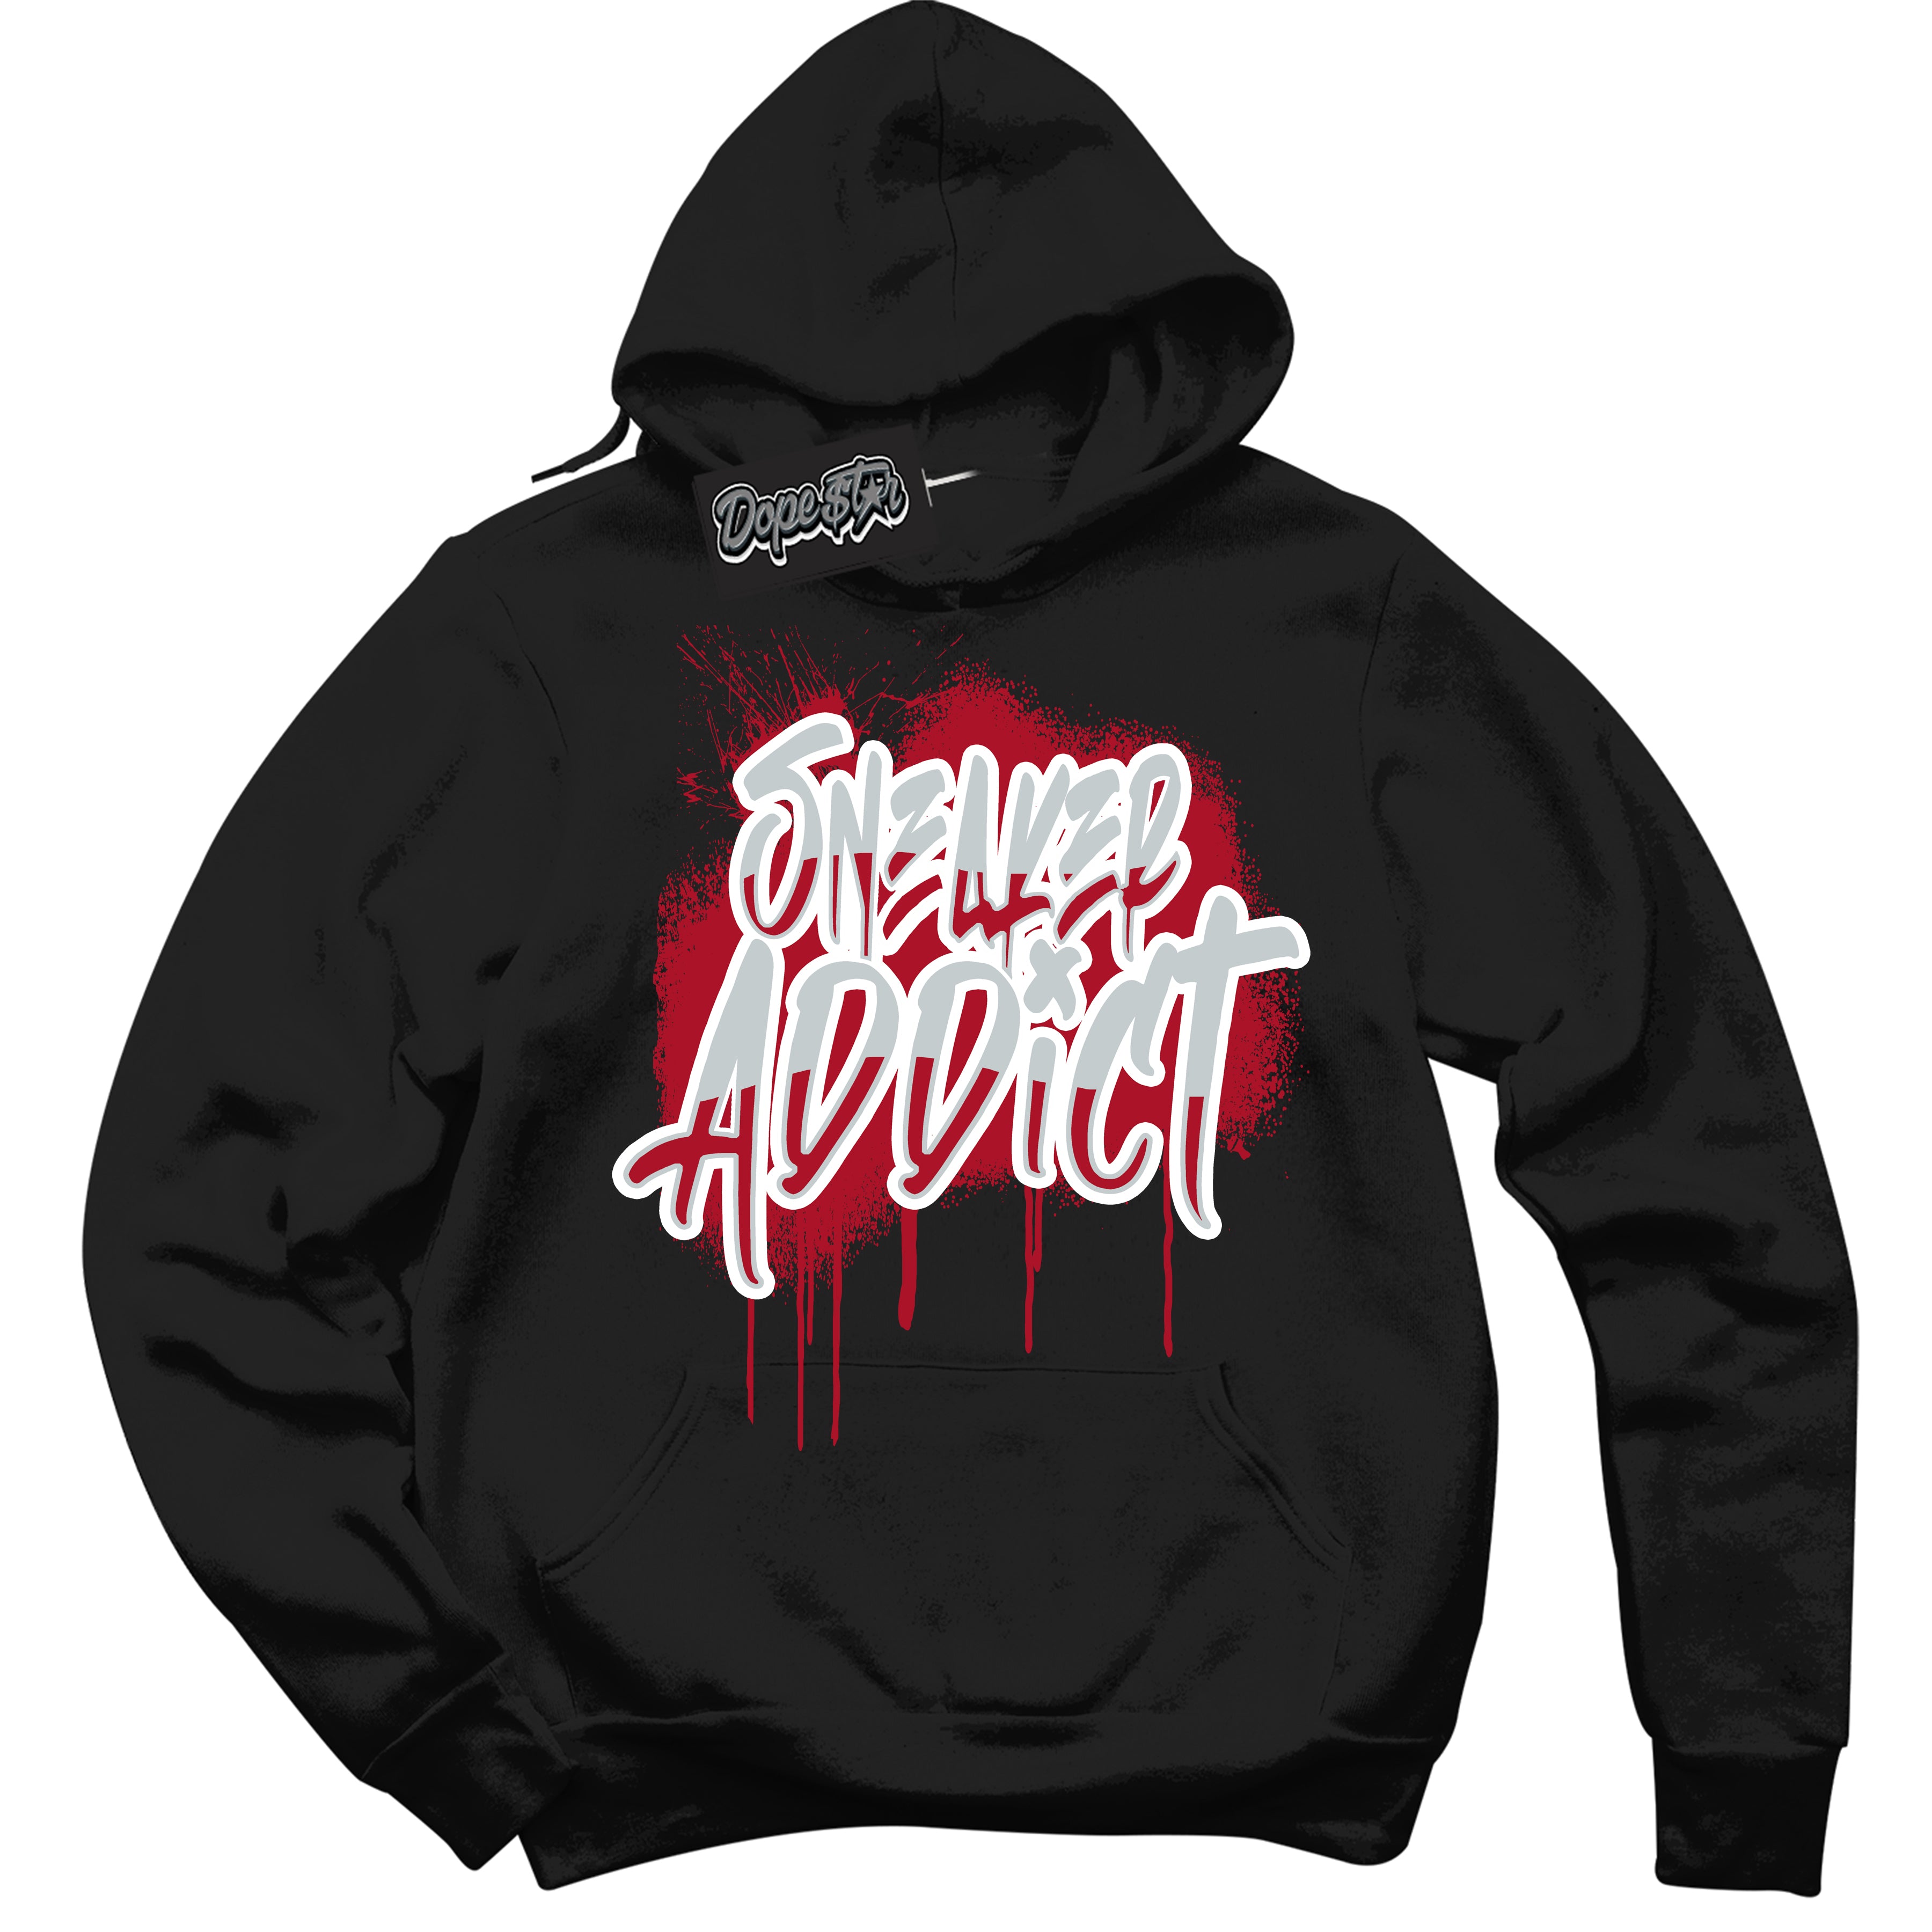 Cool Black Hoodie with “ Sneaker Addict ”  design that Perfectly Matches  Reverse Ultraman Sneakers.